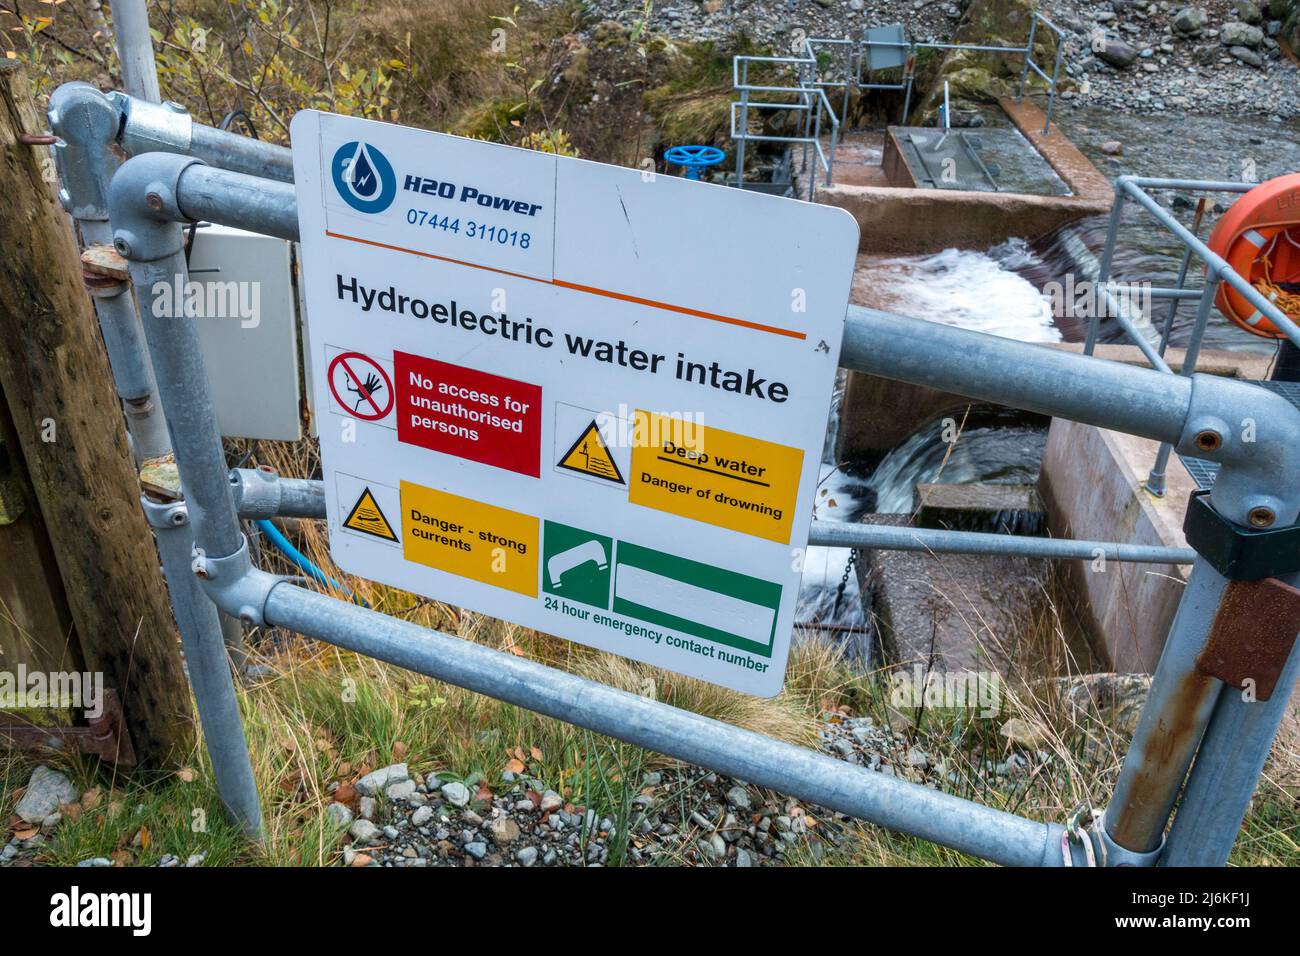 Hydroelectric plant water intake with barrier and safety sign, Glenridding, Cumbria, England, UK Stock Photo